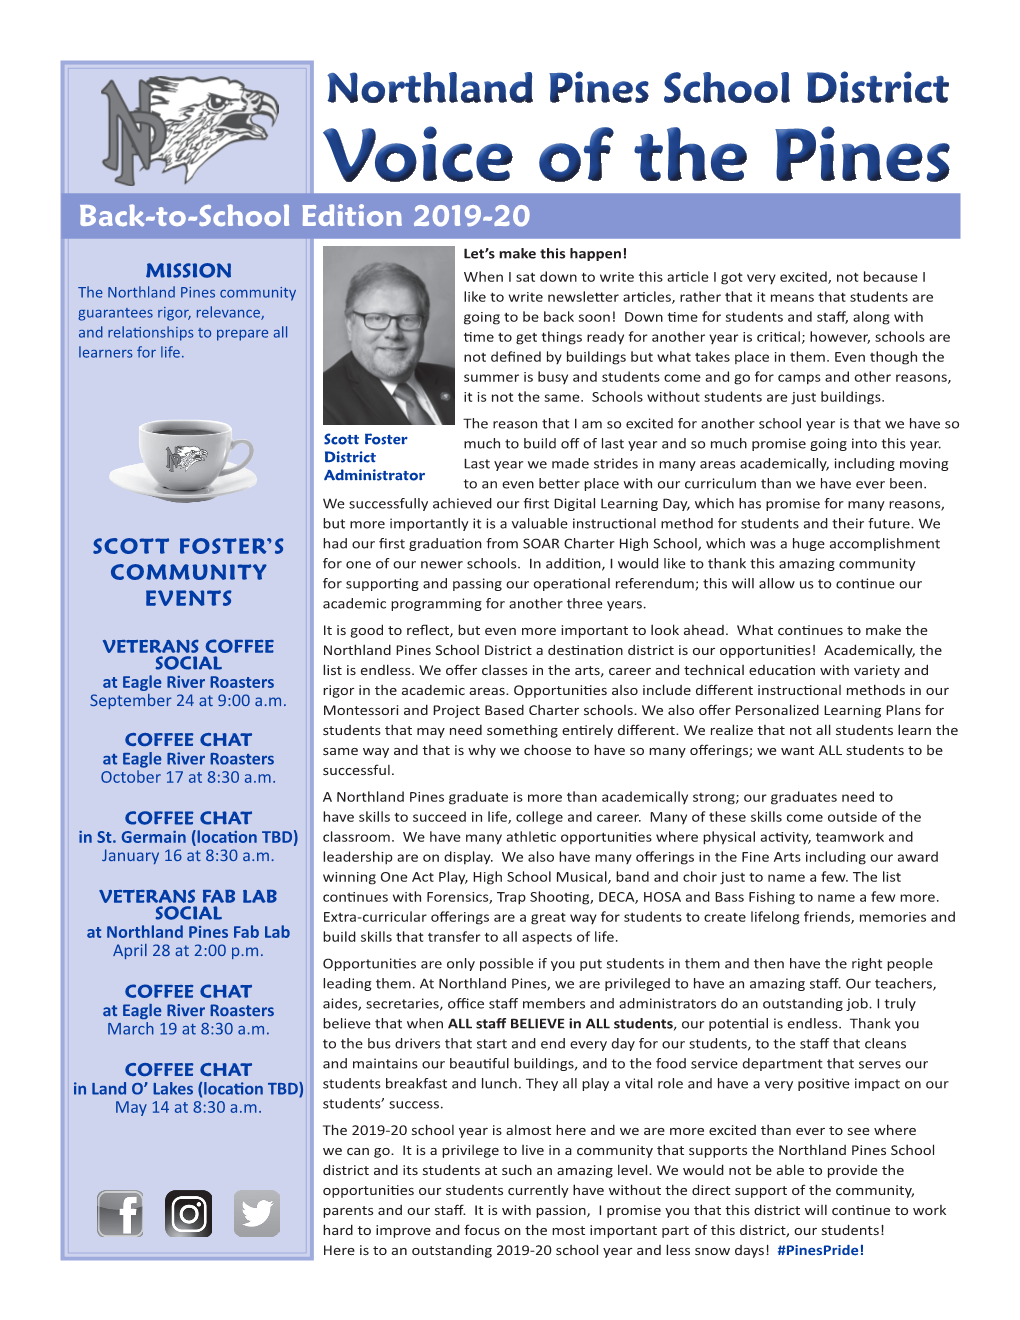 Voice of the Pines Back-To-School Edition 2019-20